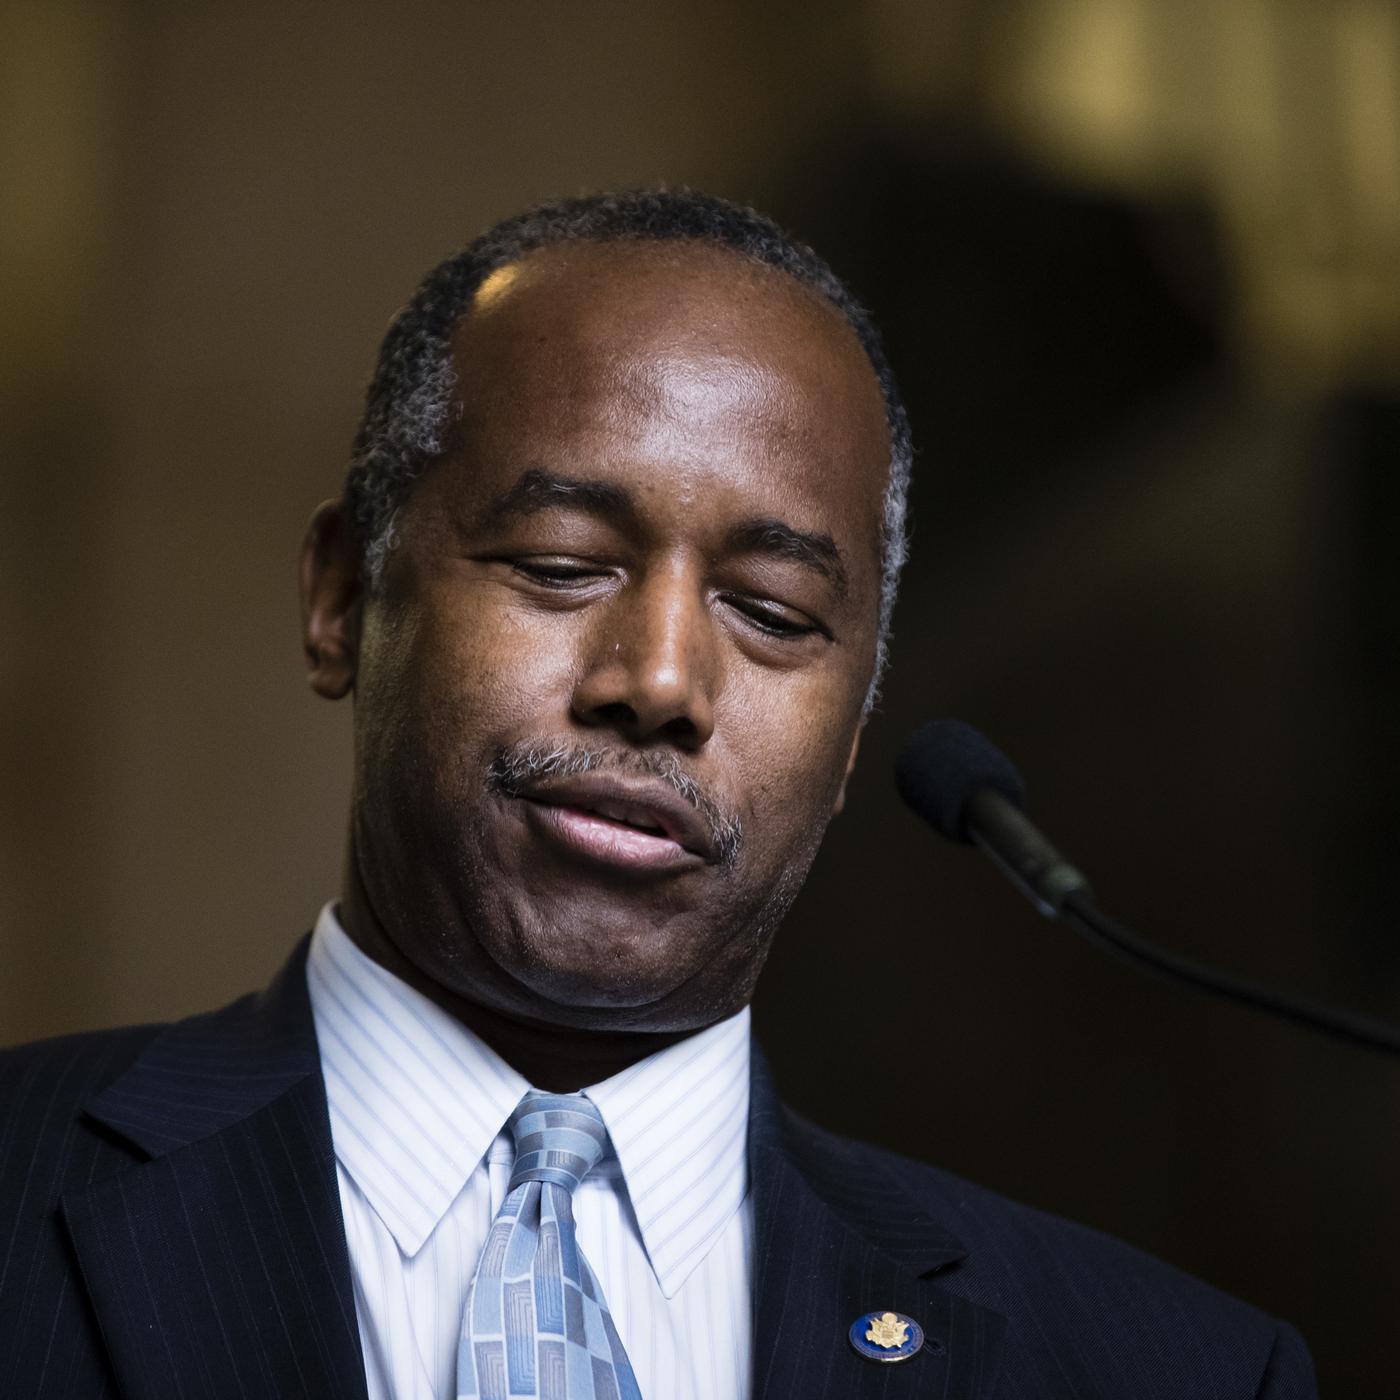 What Exactly is Ben Carson Up To at HUD?